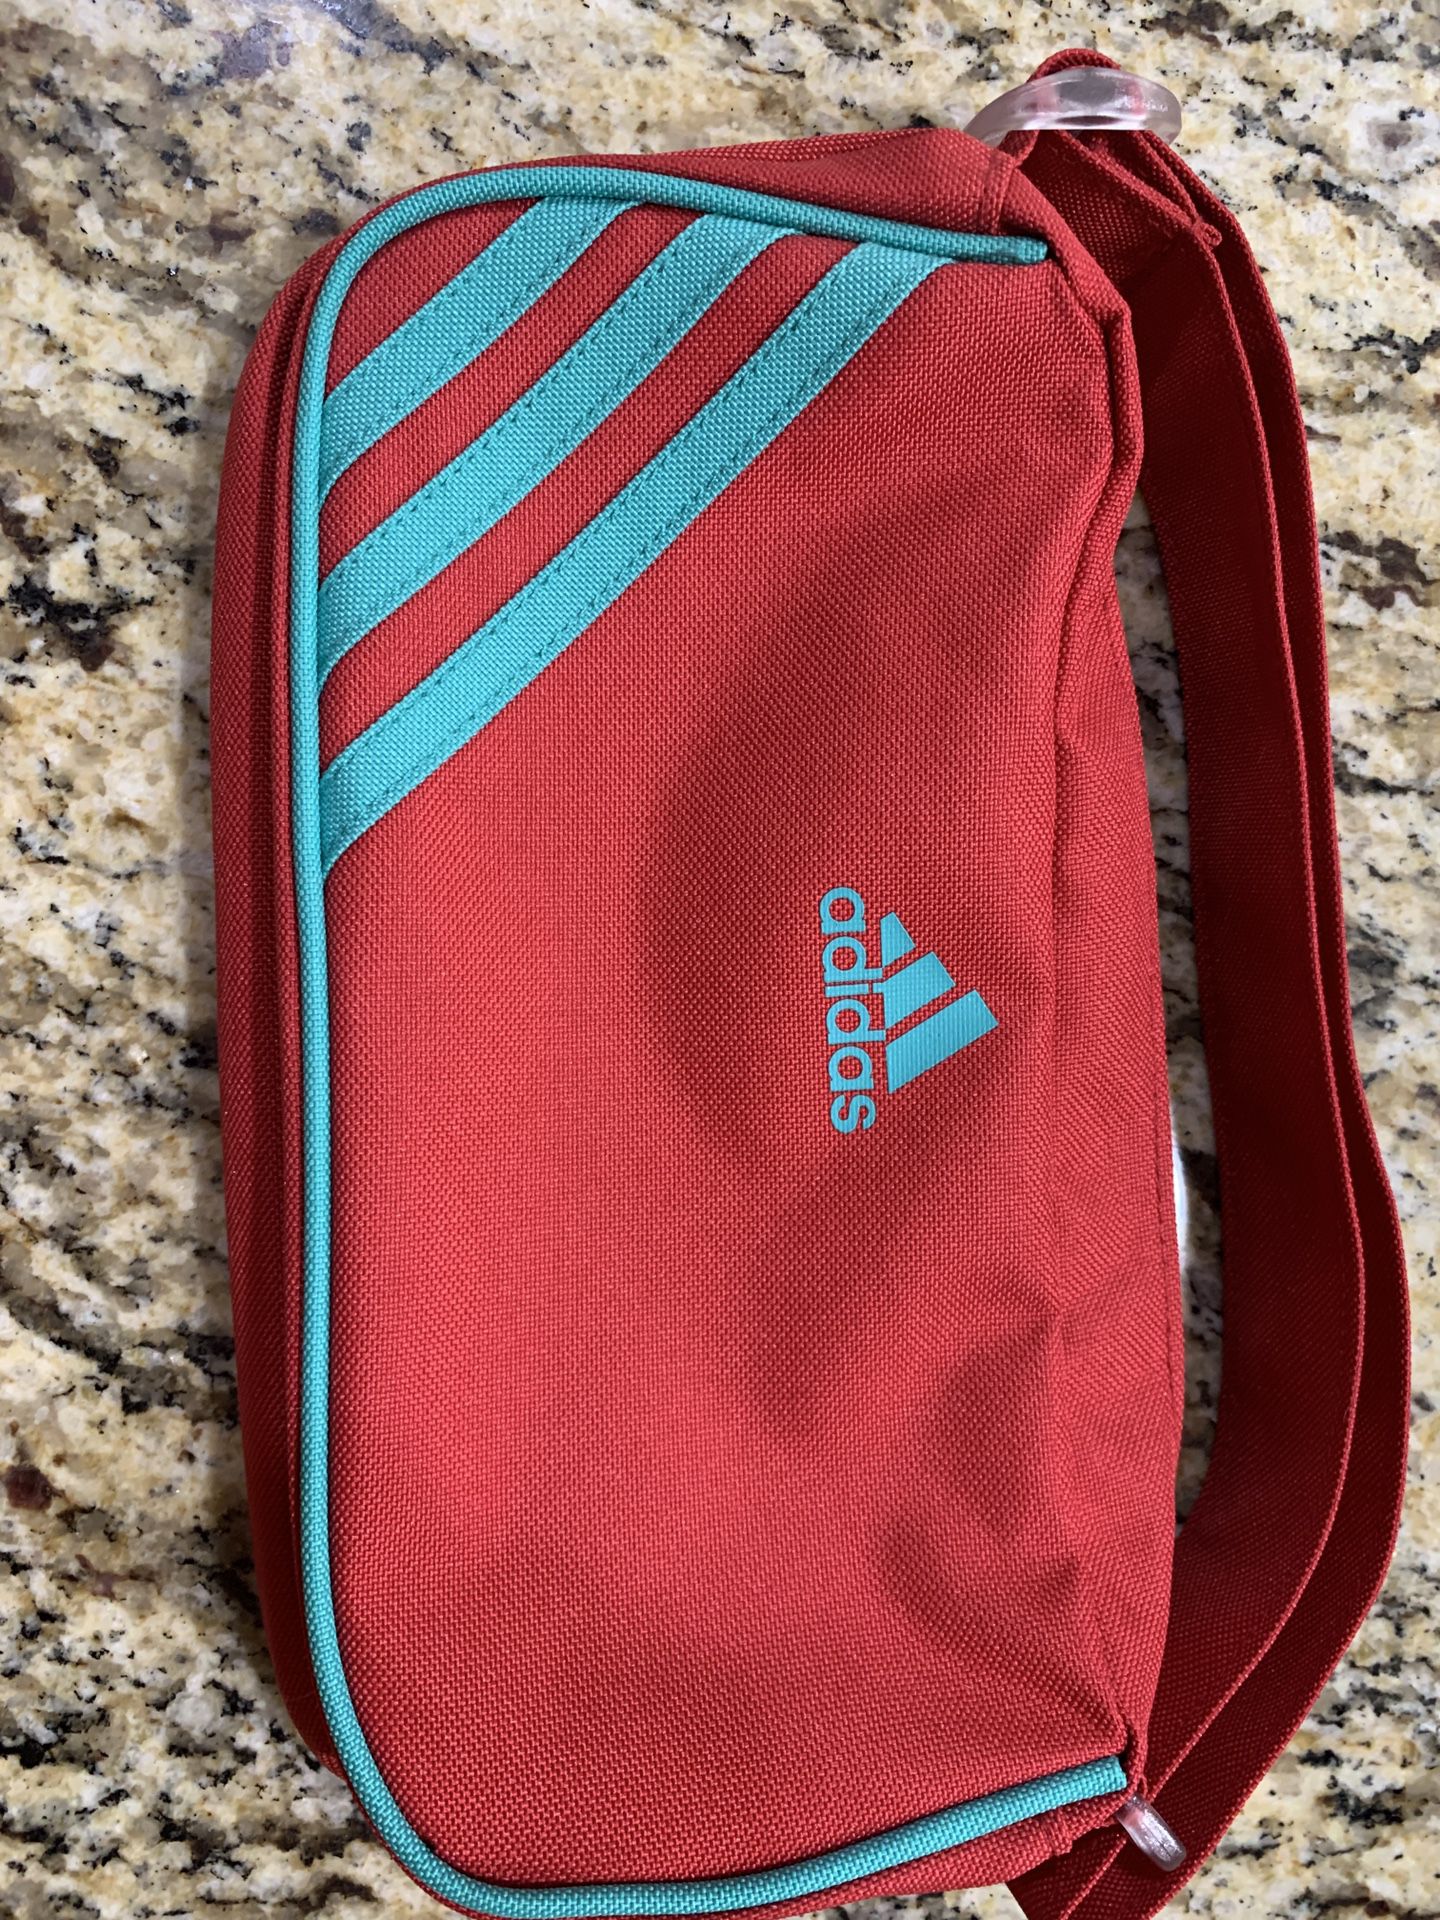 Adidas Carrying Bag / Purse Never Used